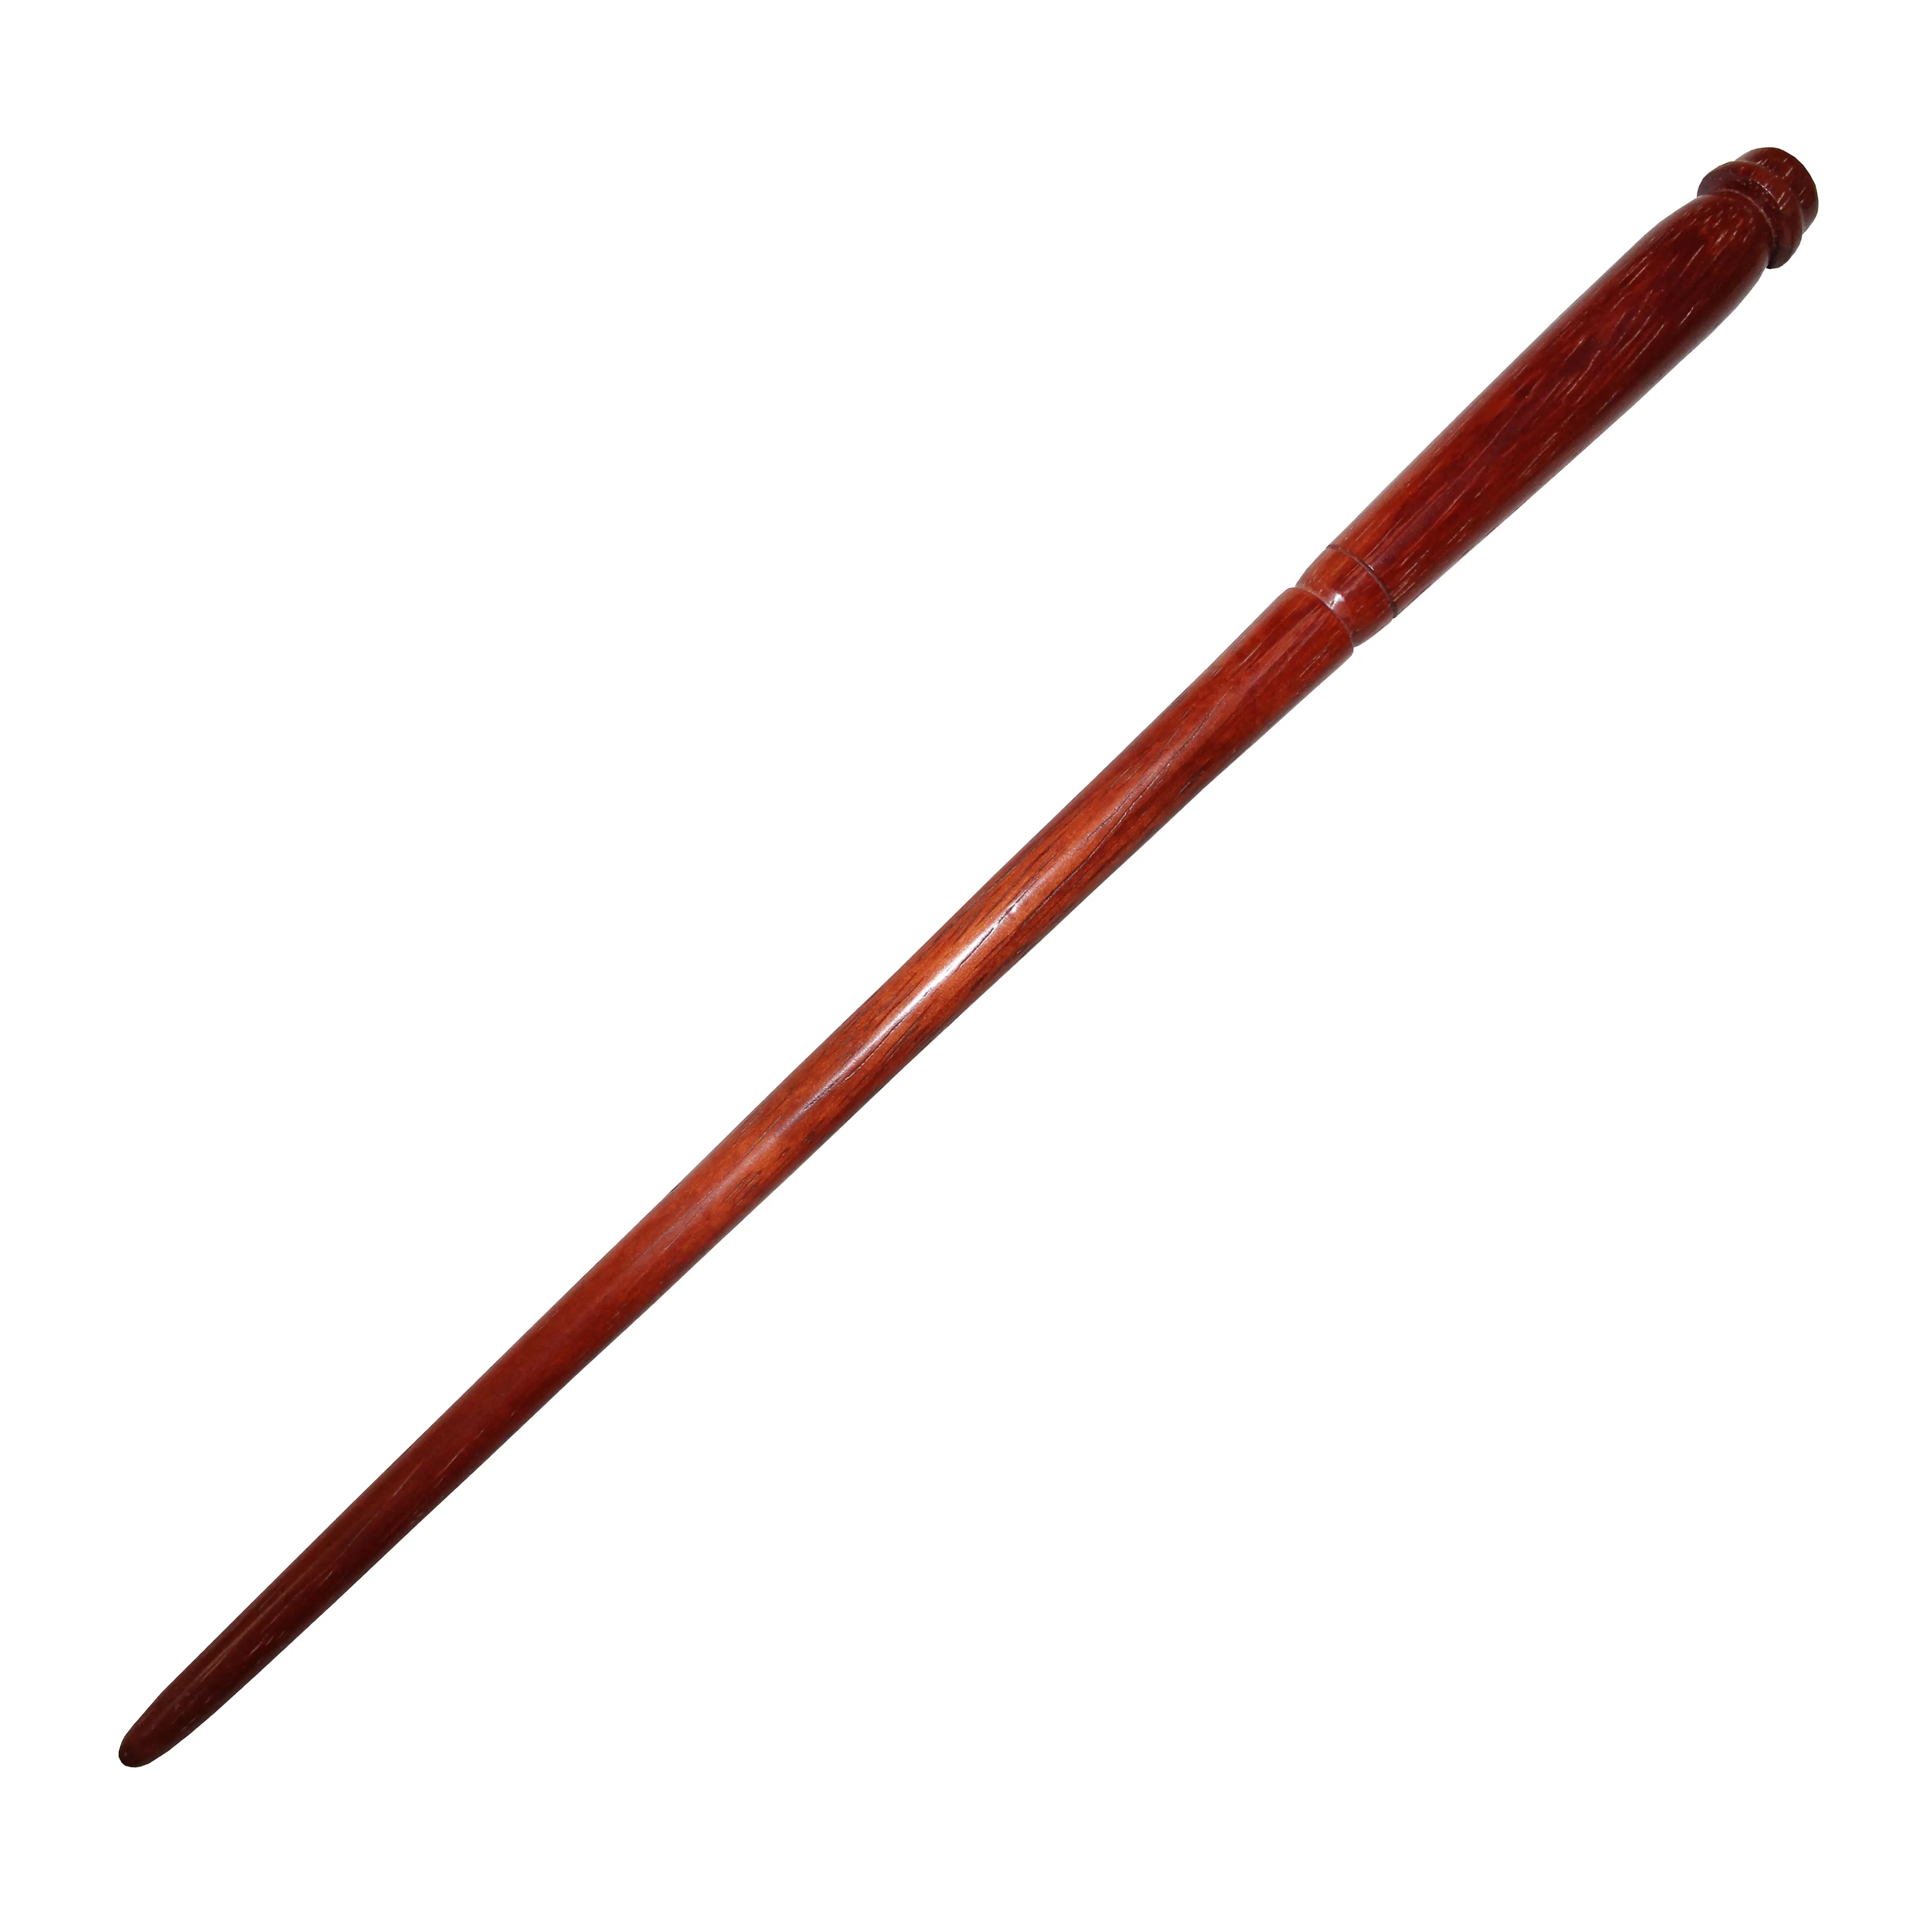 Red Padauk Wood Stick Hiquality Re-useable Fashionable Exotic Lumber Magic Wand Toy For Gift